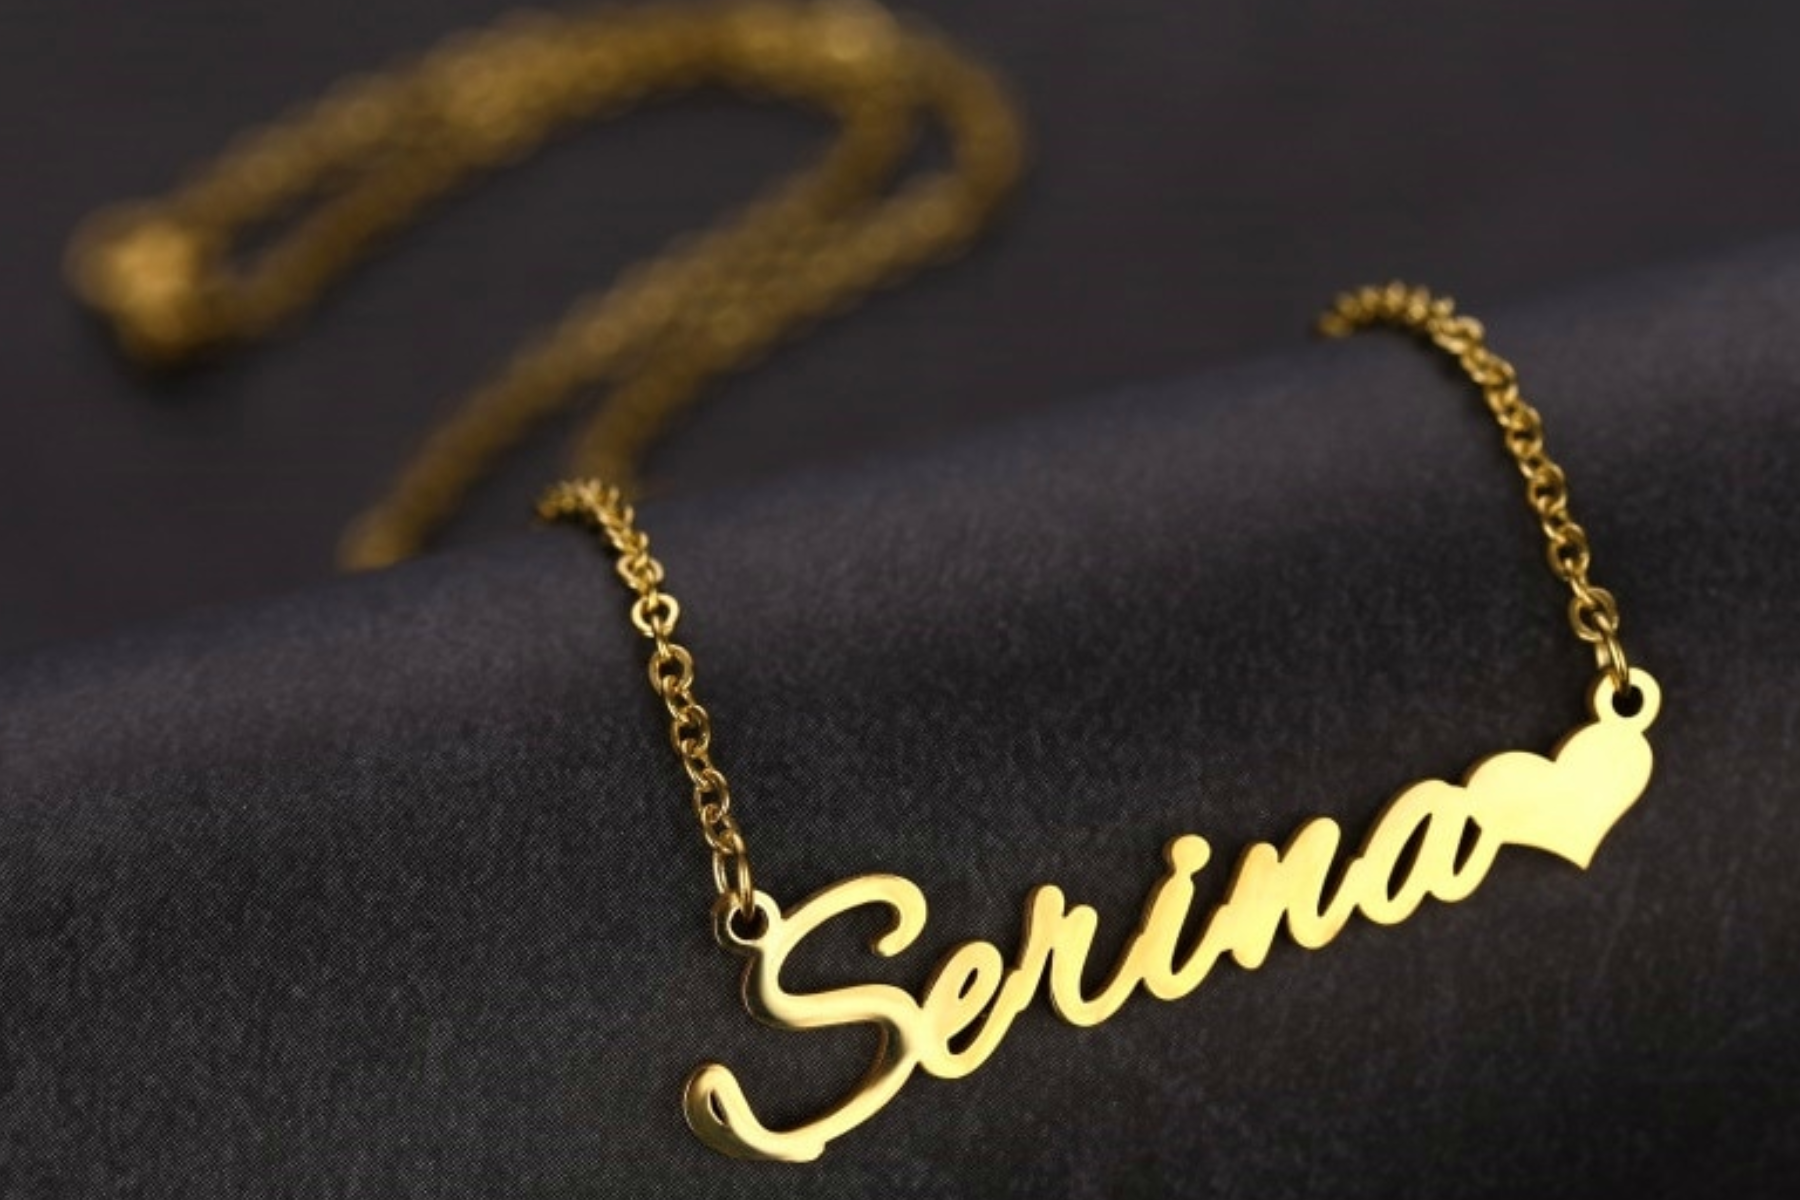 Personalized Name Necklaces - Why They're More Than Just A Piece Of Jewelry